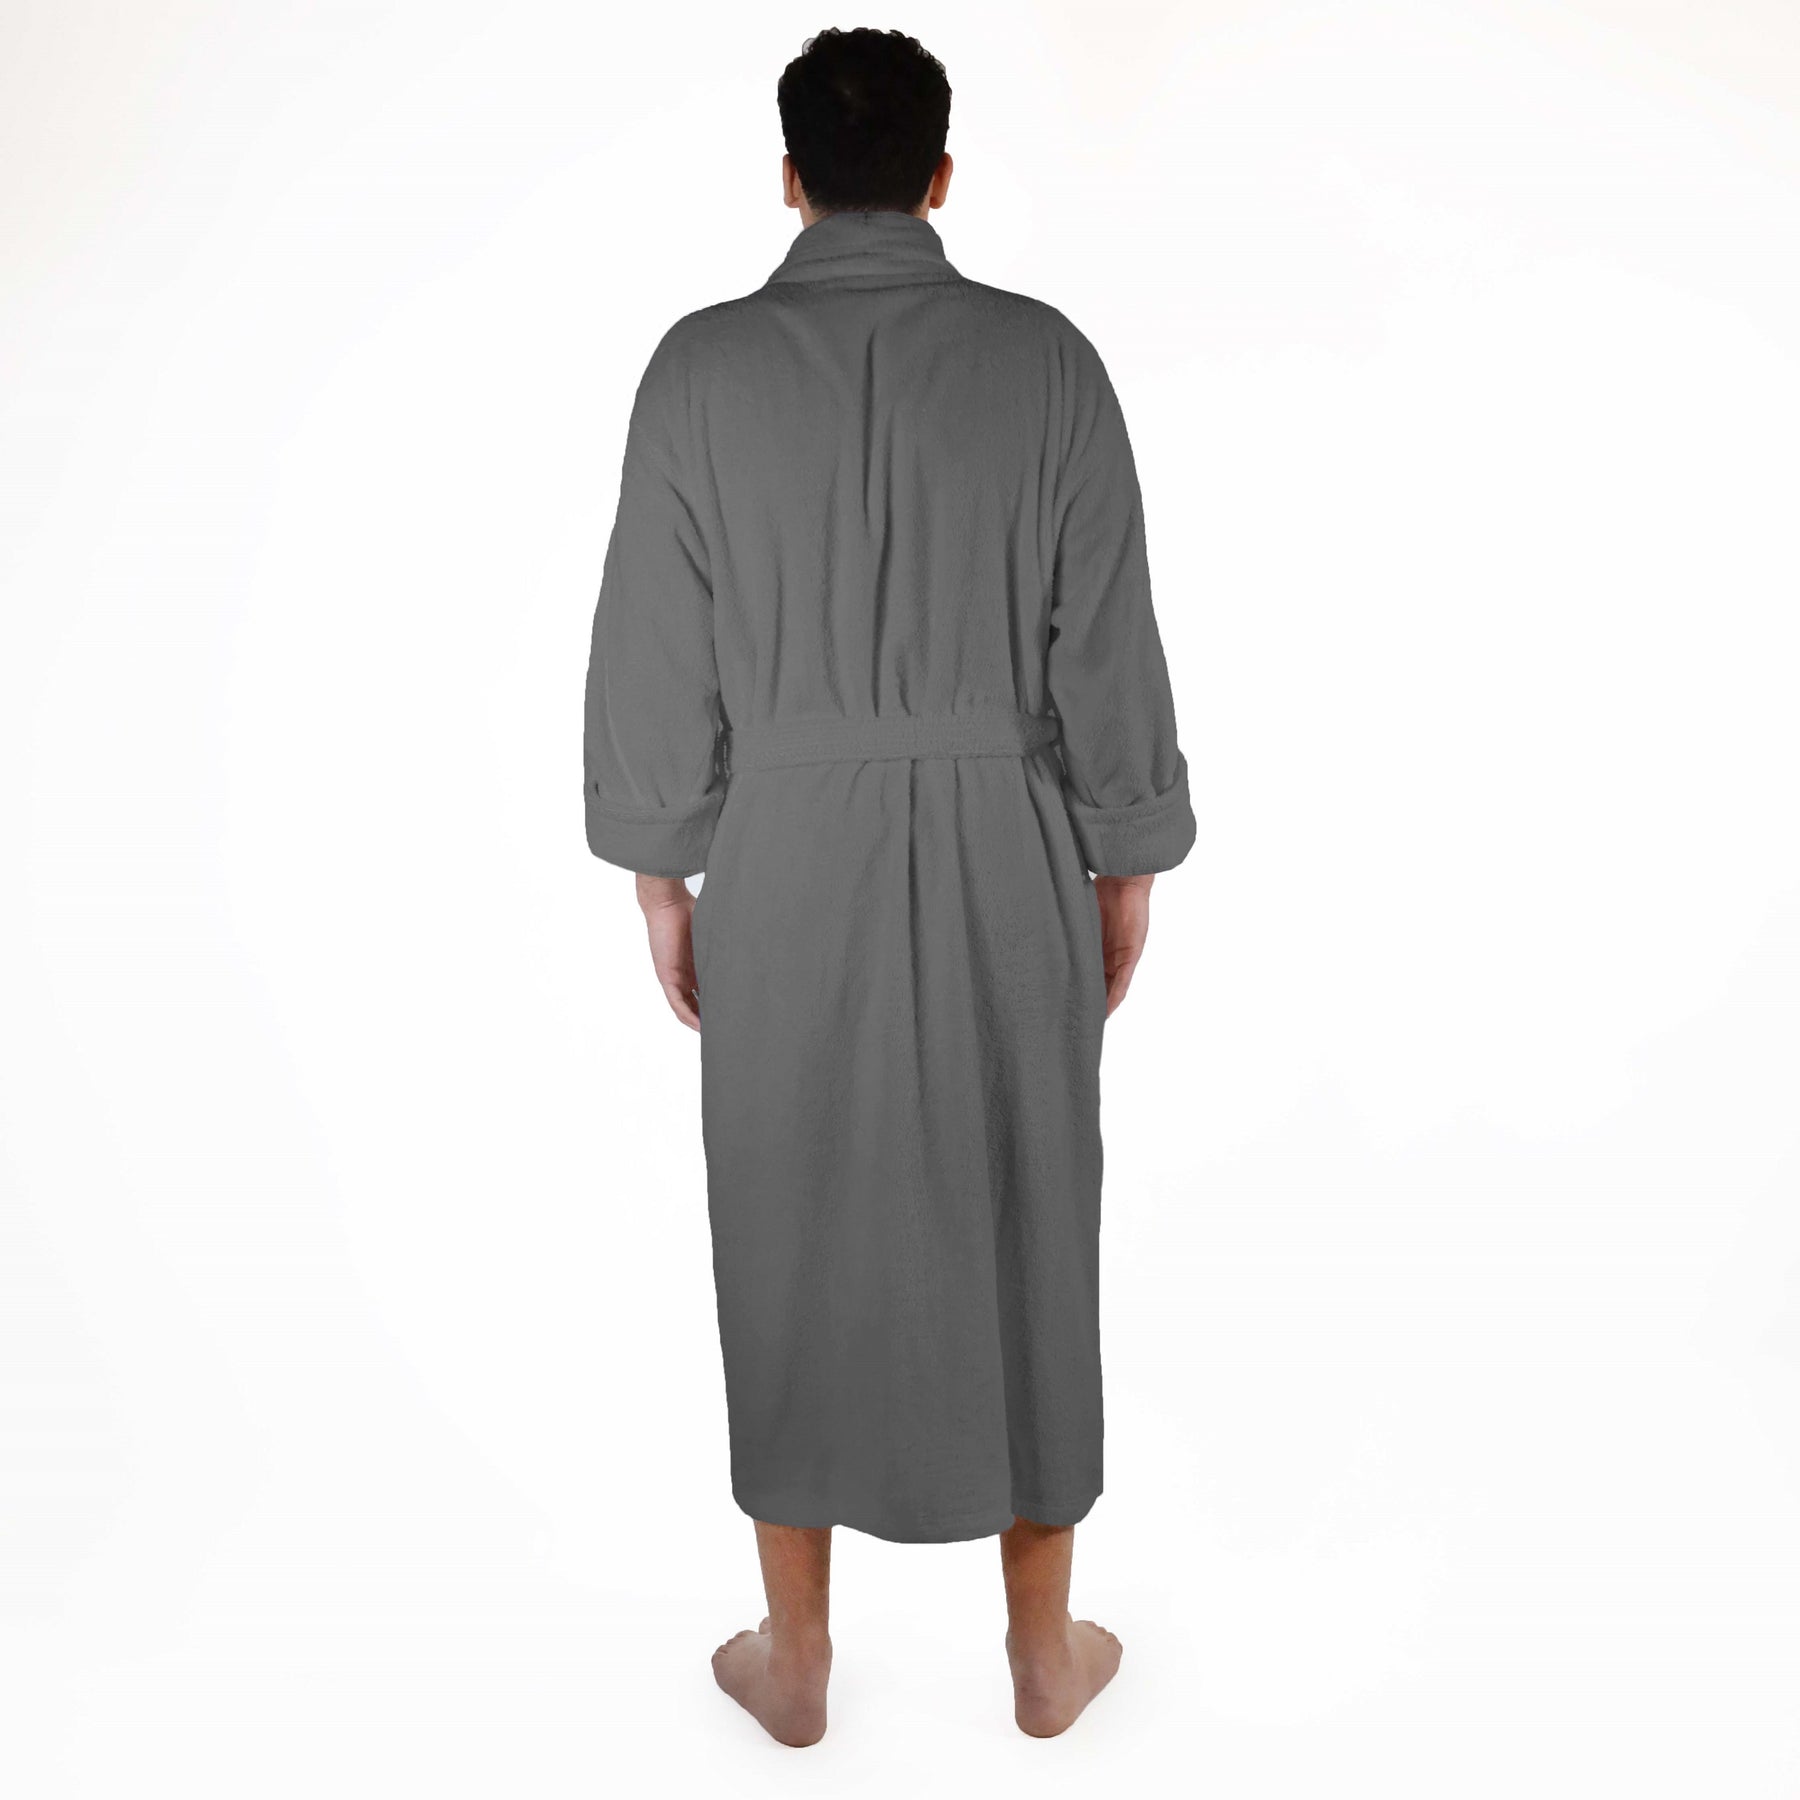 Classic Men's Home and Bath Collection Traditional Turkish Cotton Cozy Bathrobe with Adjustable Belt and Hanging Loop - Grey